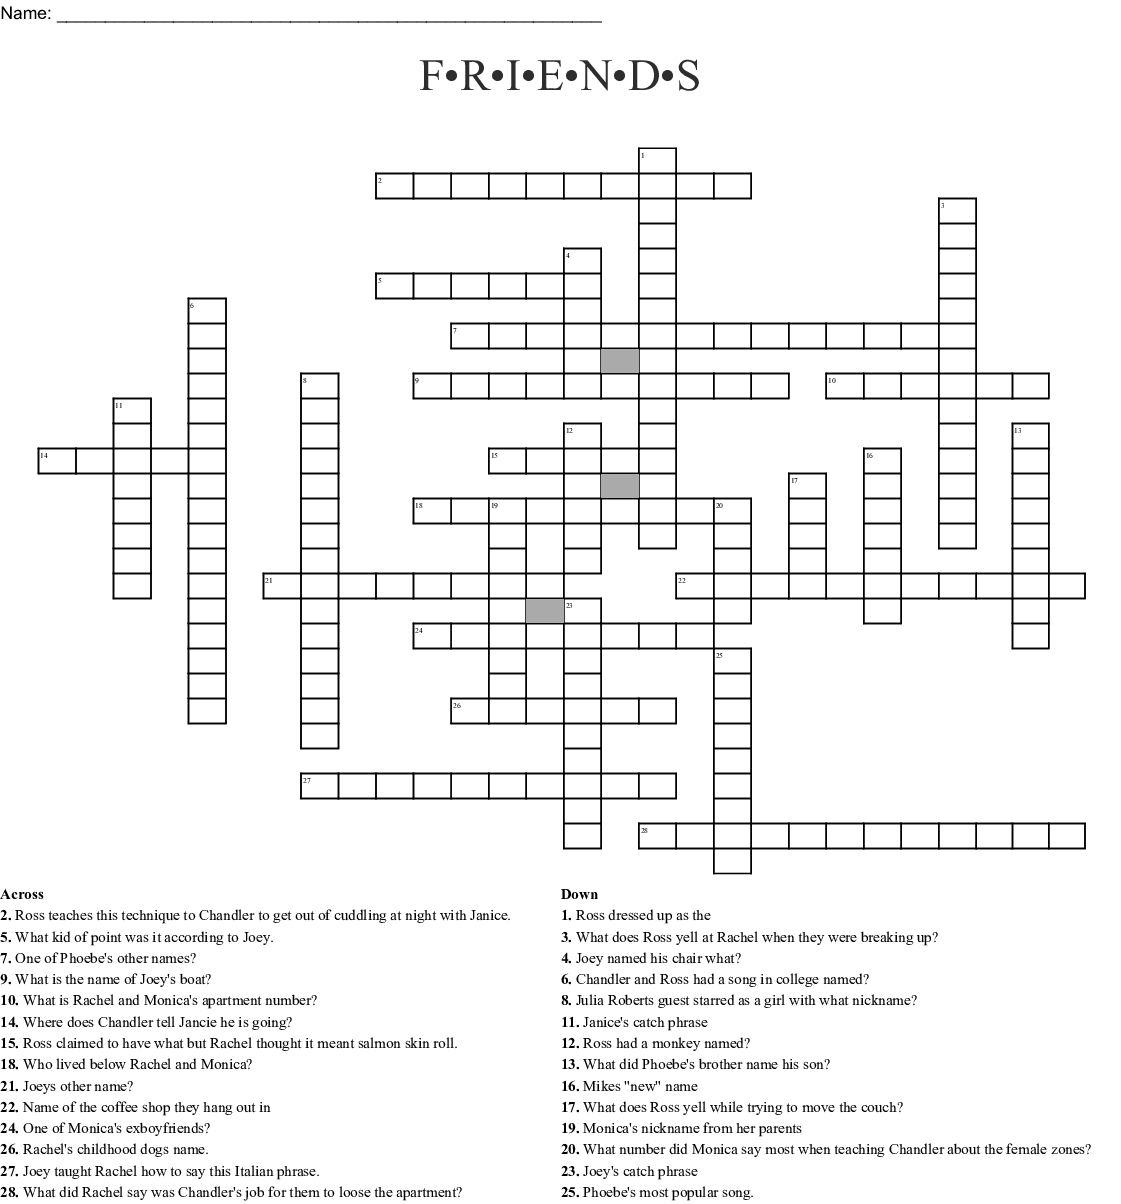 Band That Sang The Friends Theme Song Crossword Theme Image